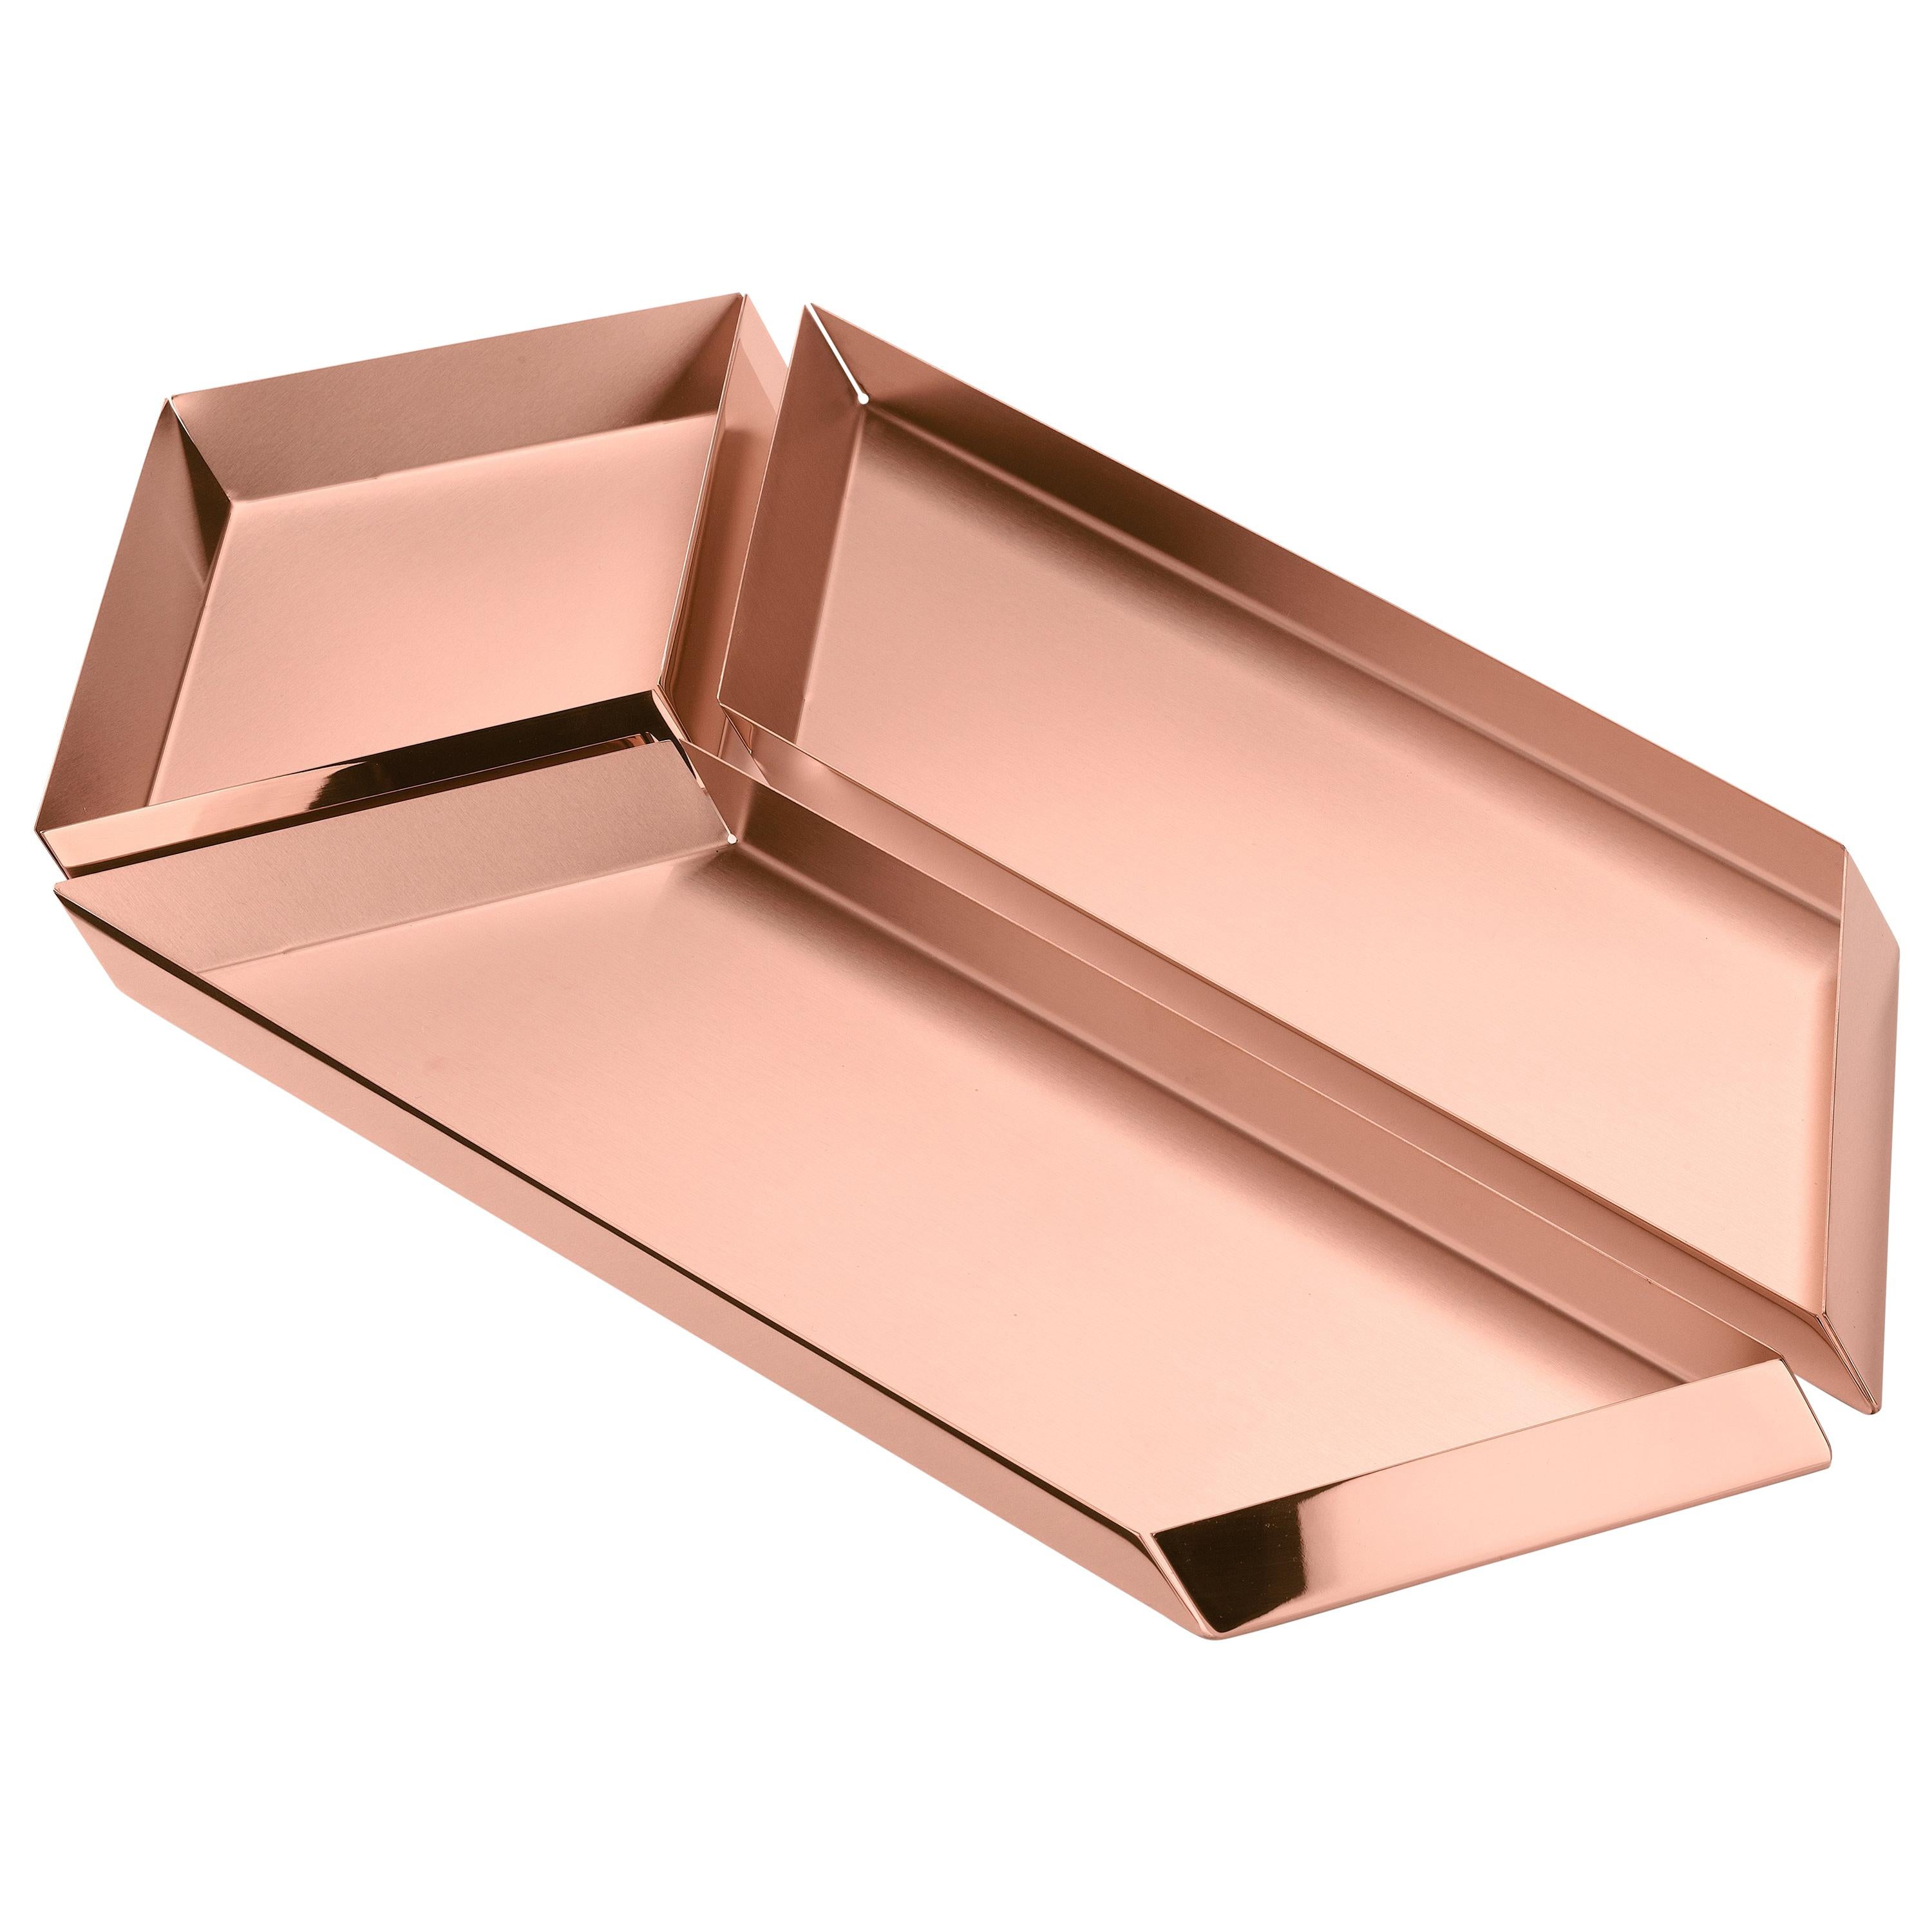 Ghidini 1961 Axonometry Large Parallelepiped Tray in Copper by Elisa Giovanni For Sale